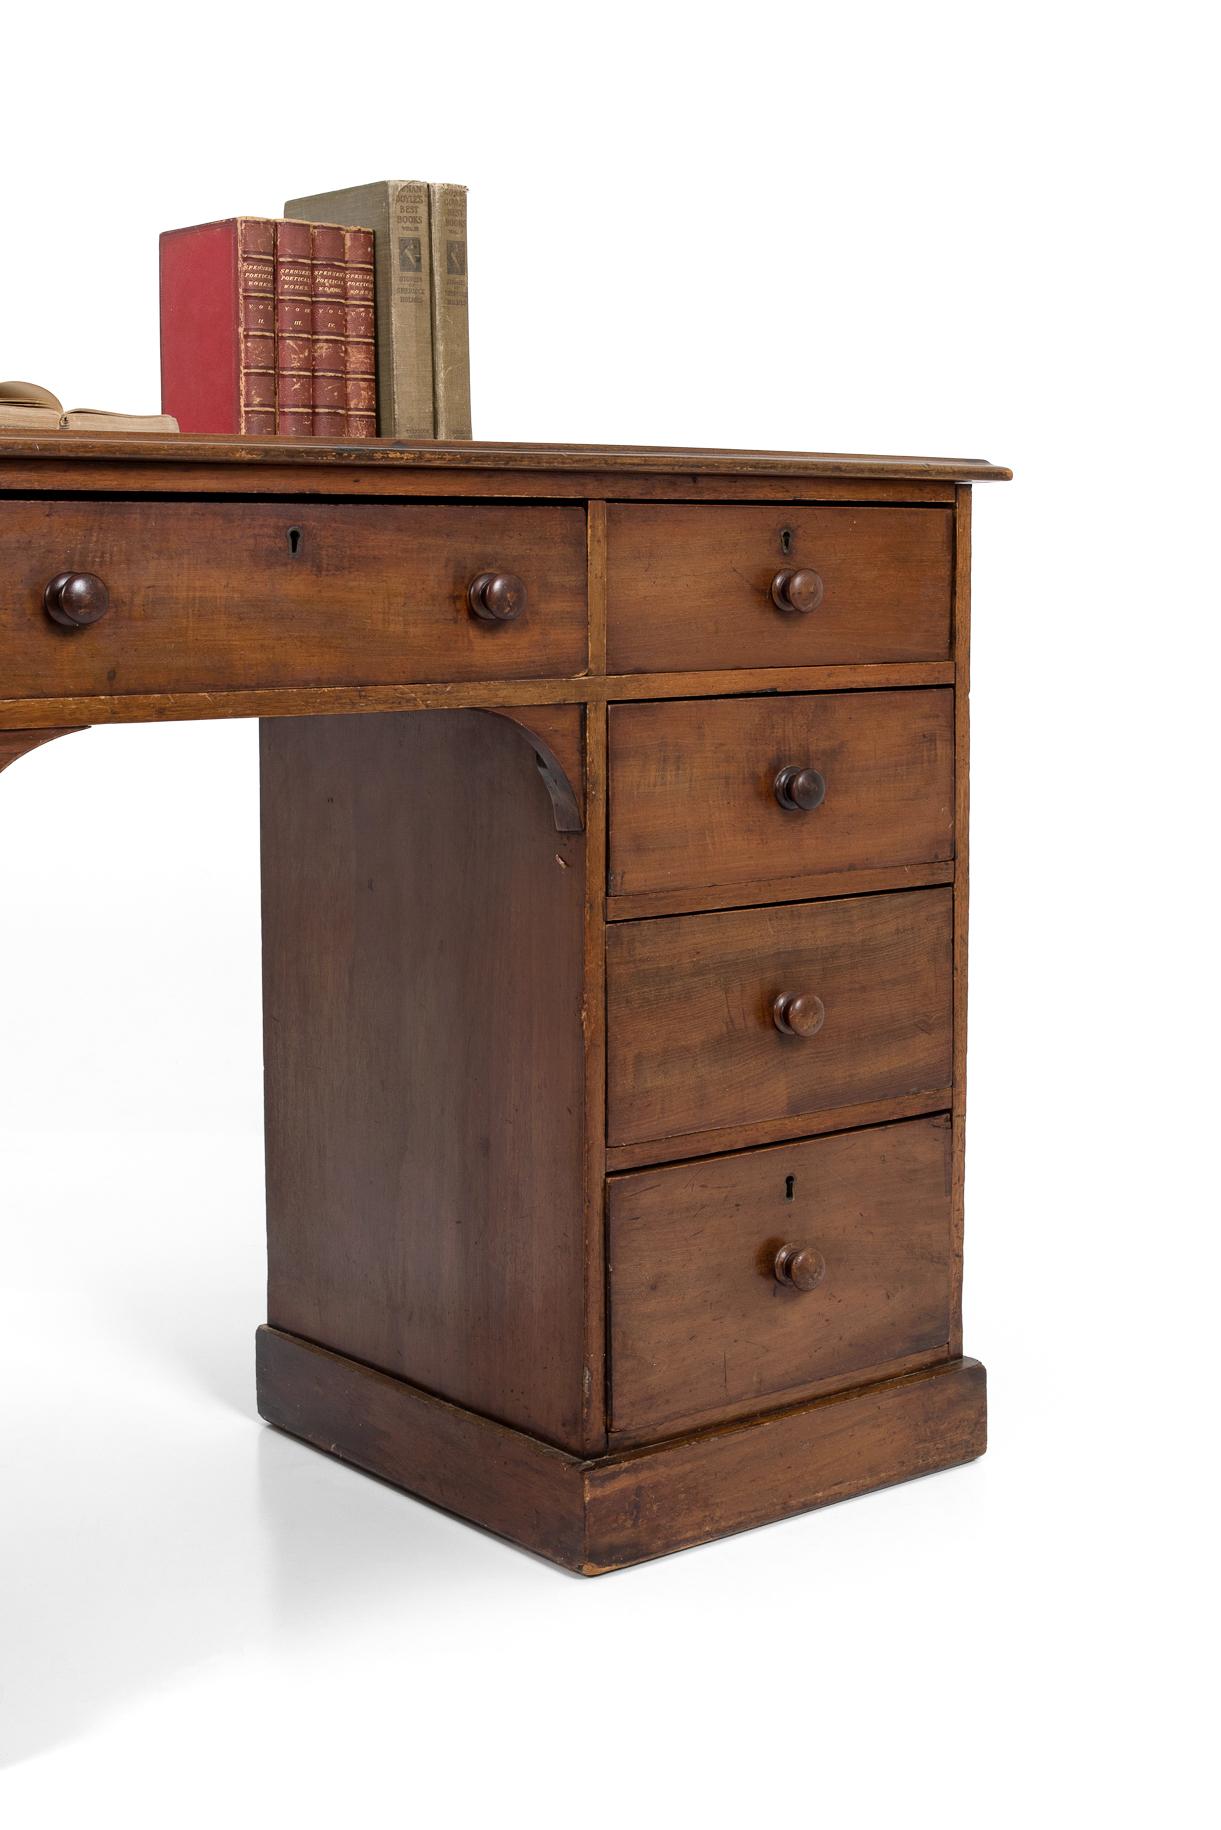 19th Century Victorian Kneehole Desk with Three Graduated Drawers, circa 1870